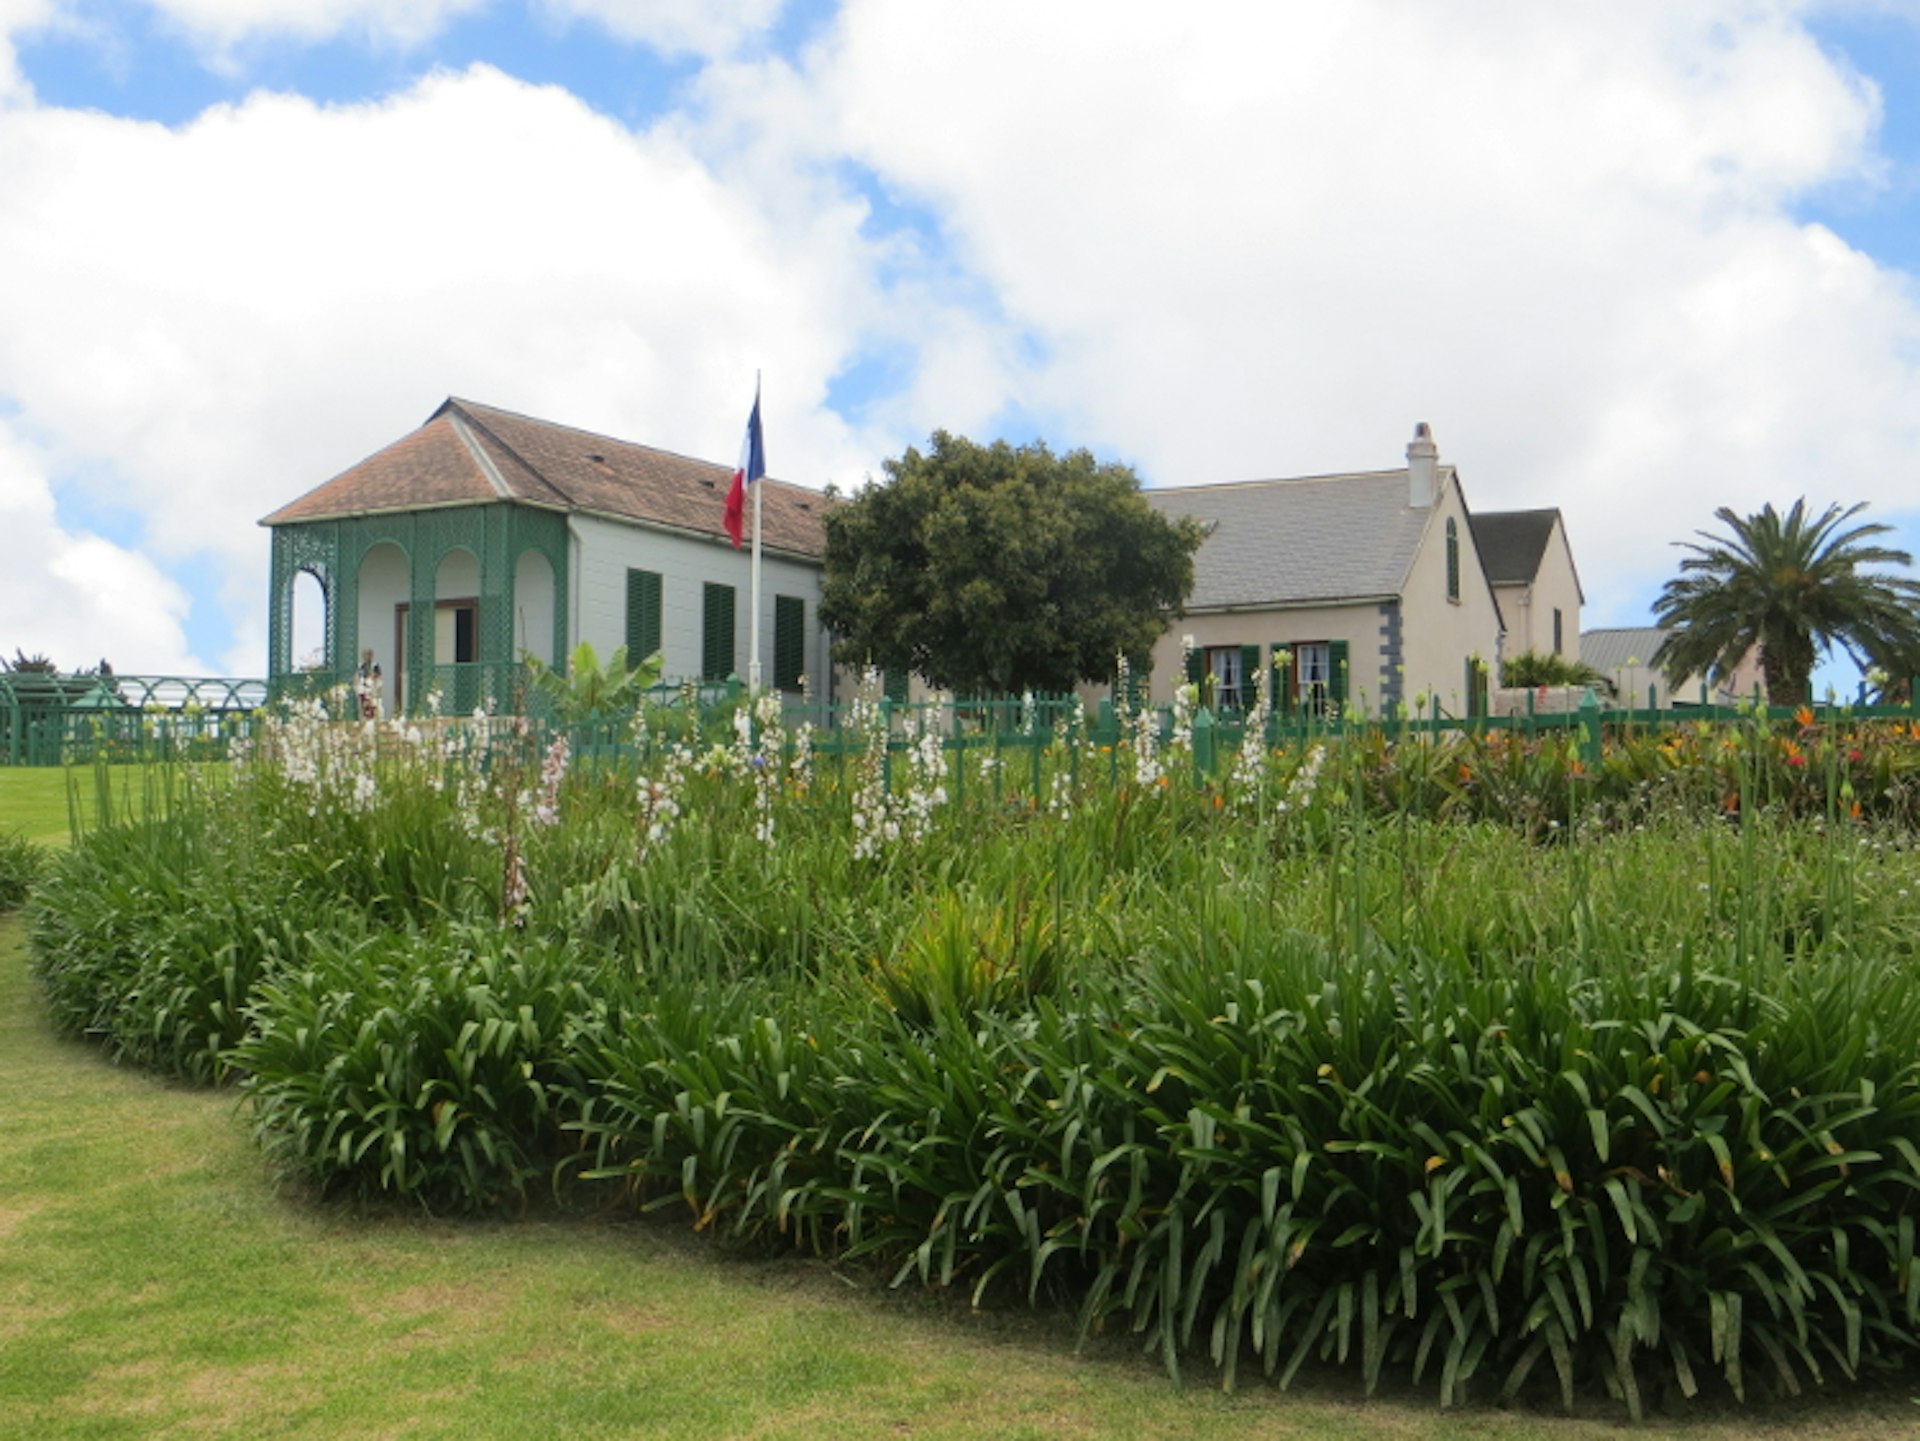 Longwood House, the final home of Napoleon Bonparte during his exile in St Helena. Image by Michael Arkus / Lonely Planet